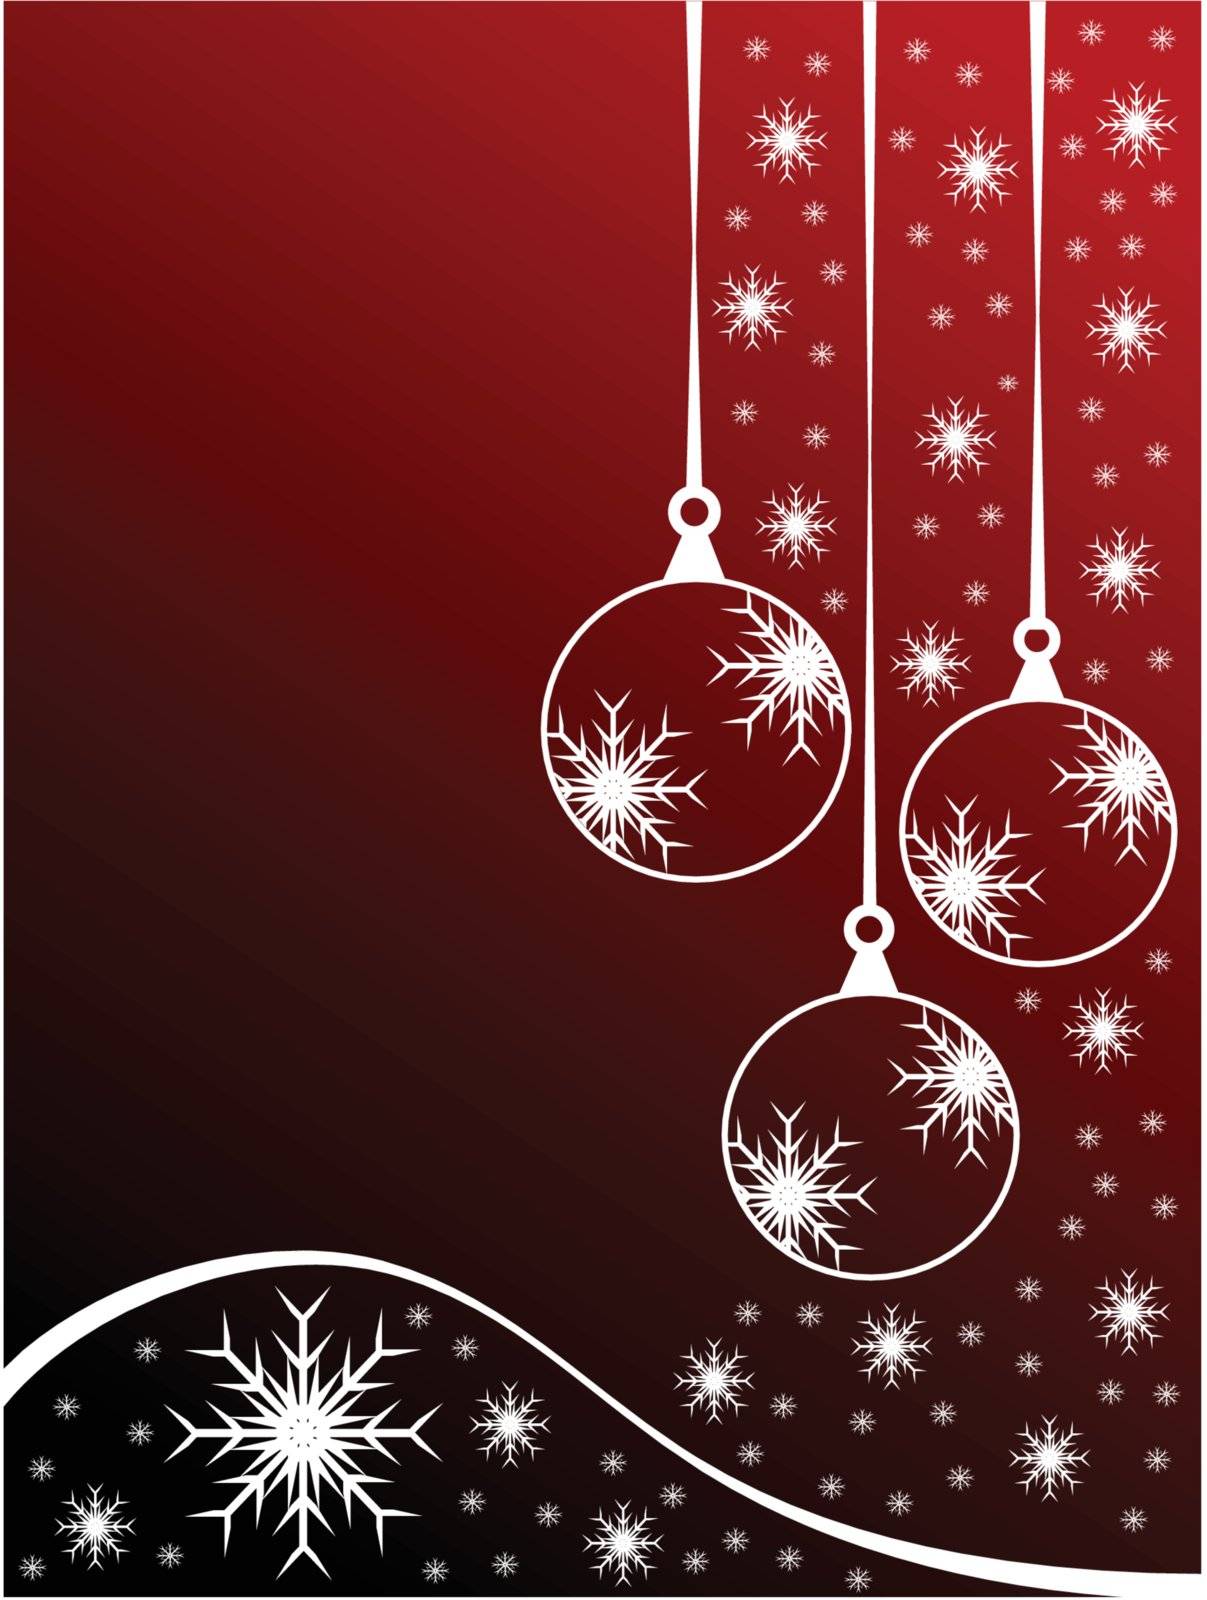 An abstract Christmas vector illustration with clear white outline baubles on a darker backdrop with white snowflakes and room for text